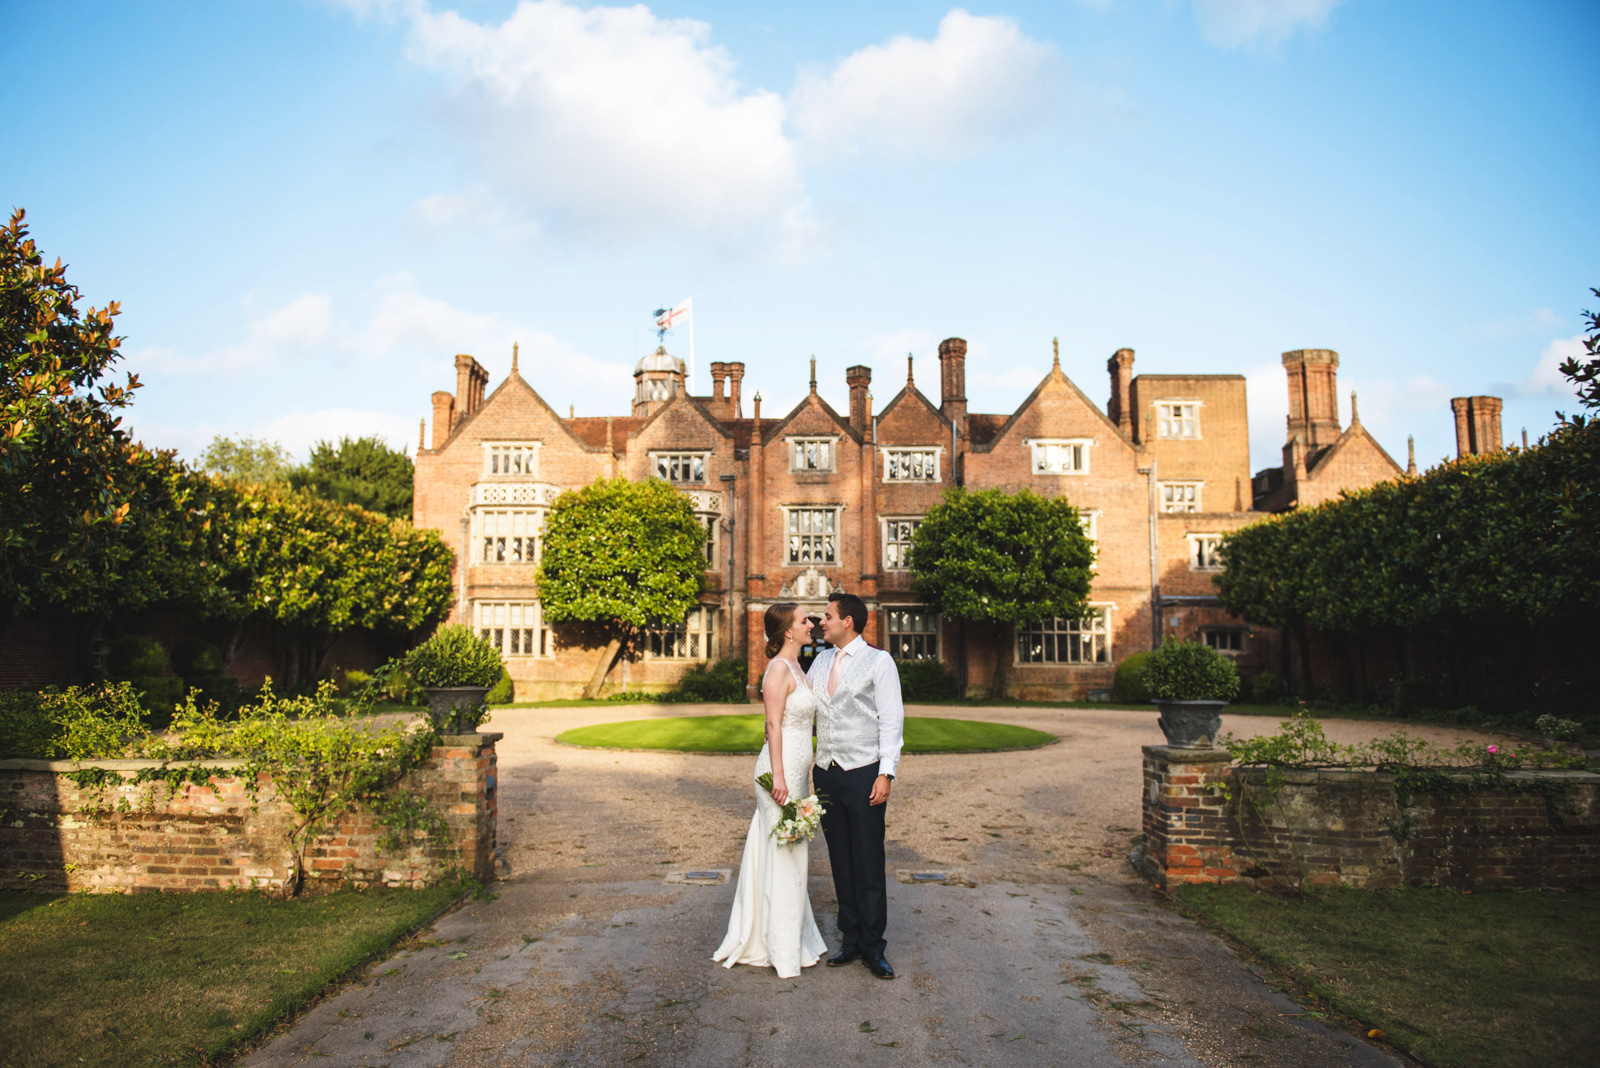 Bride and groom photos at Great Fosters in Egham.